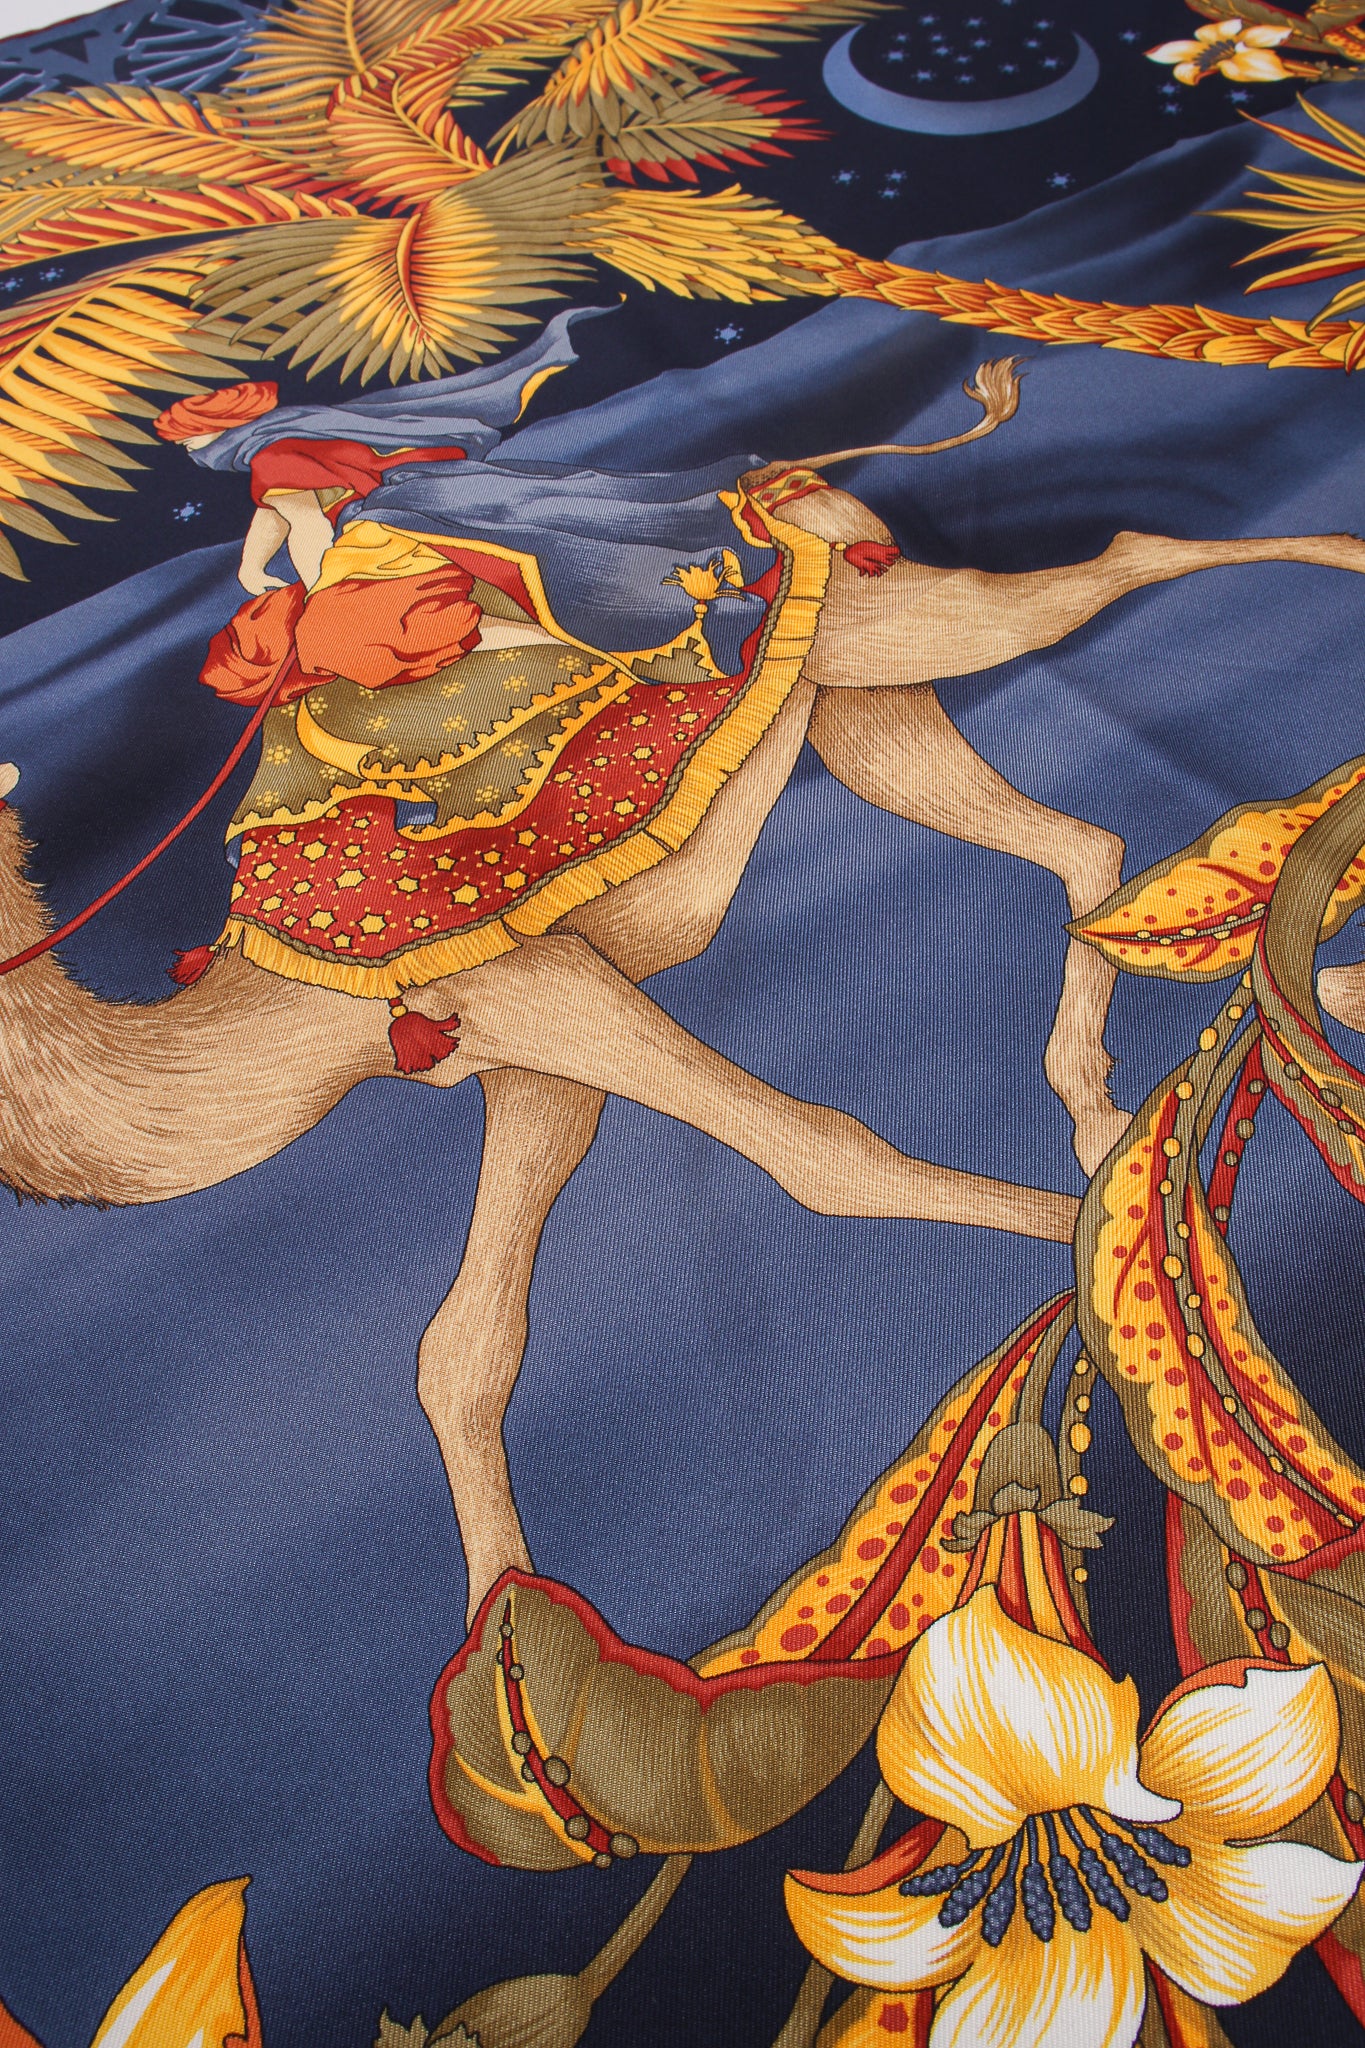 Vintage Salvatore Ferragamo Thousand And One Nights Silk Scarf wear at Recess Los Angeles